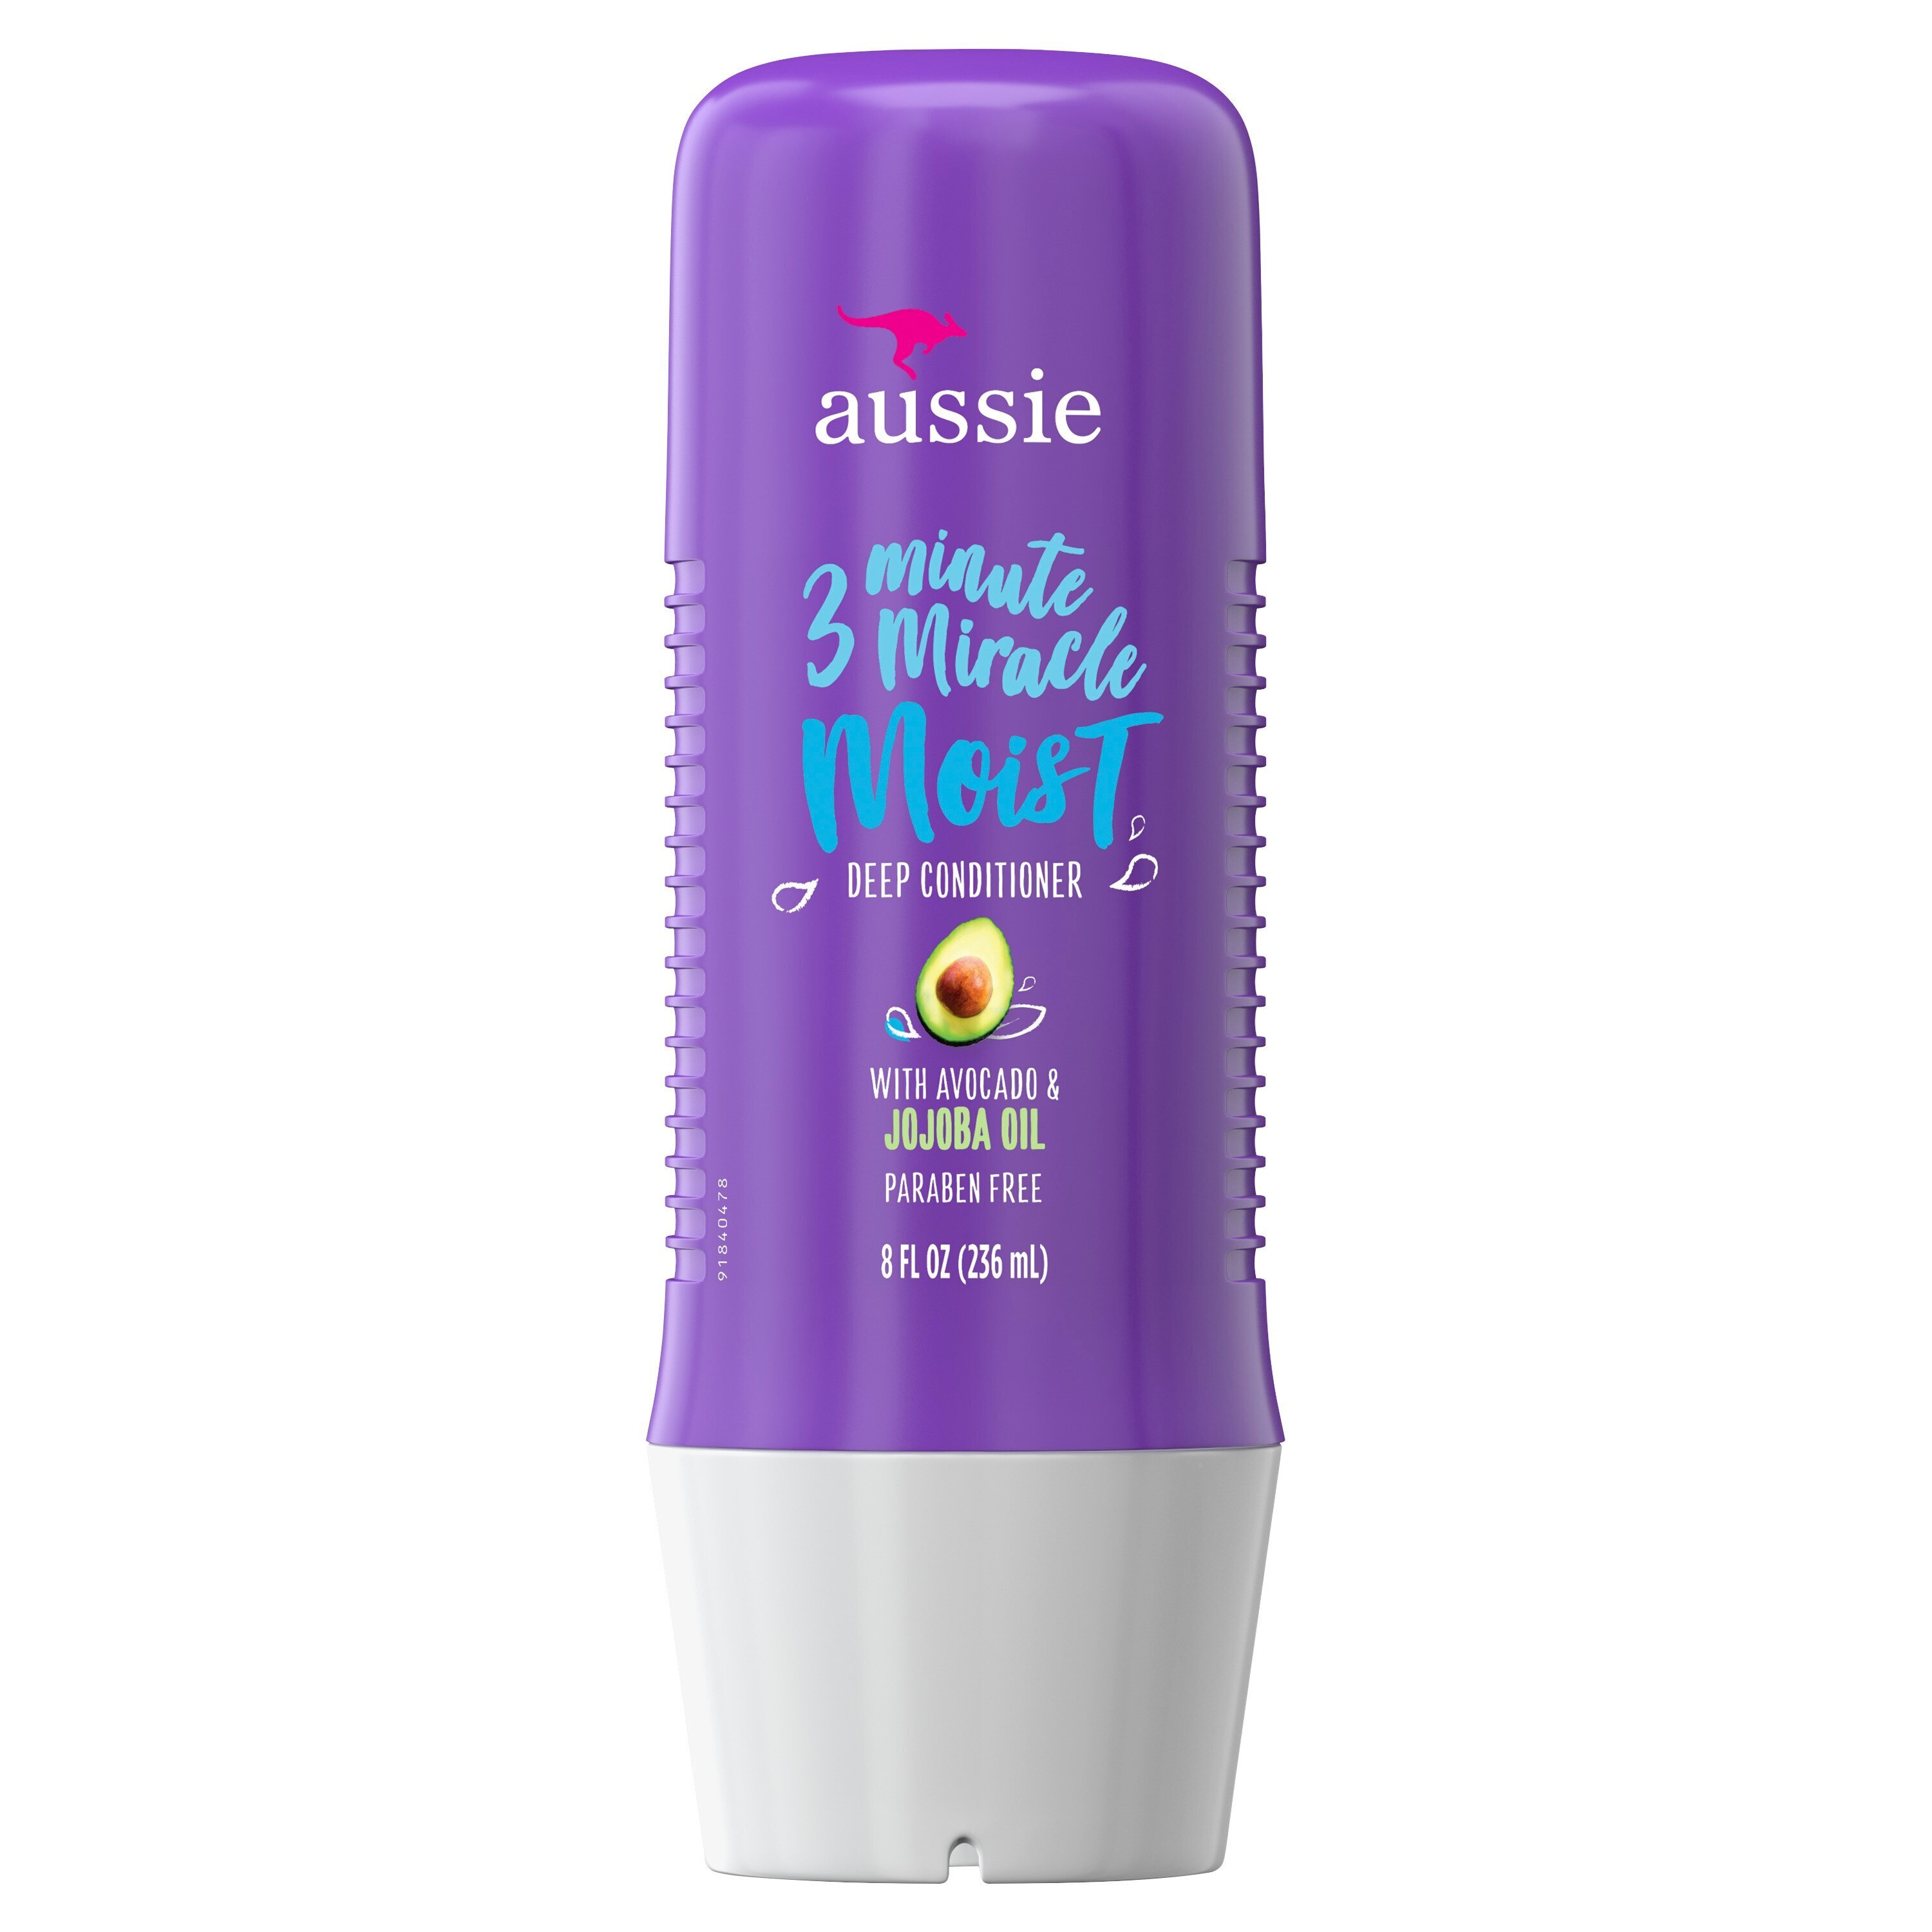 Aussie Paraben-Free Miracle Moist 3 Minute Miracle with Avocado for Dry Hair Repair, 8 OZ